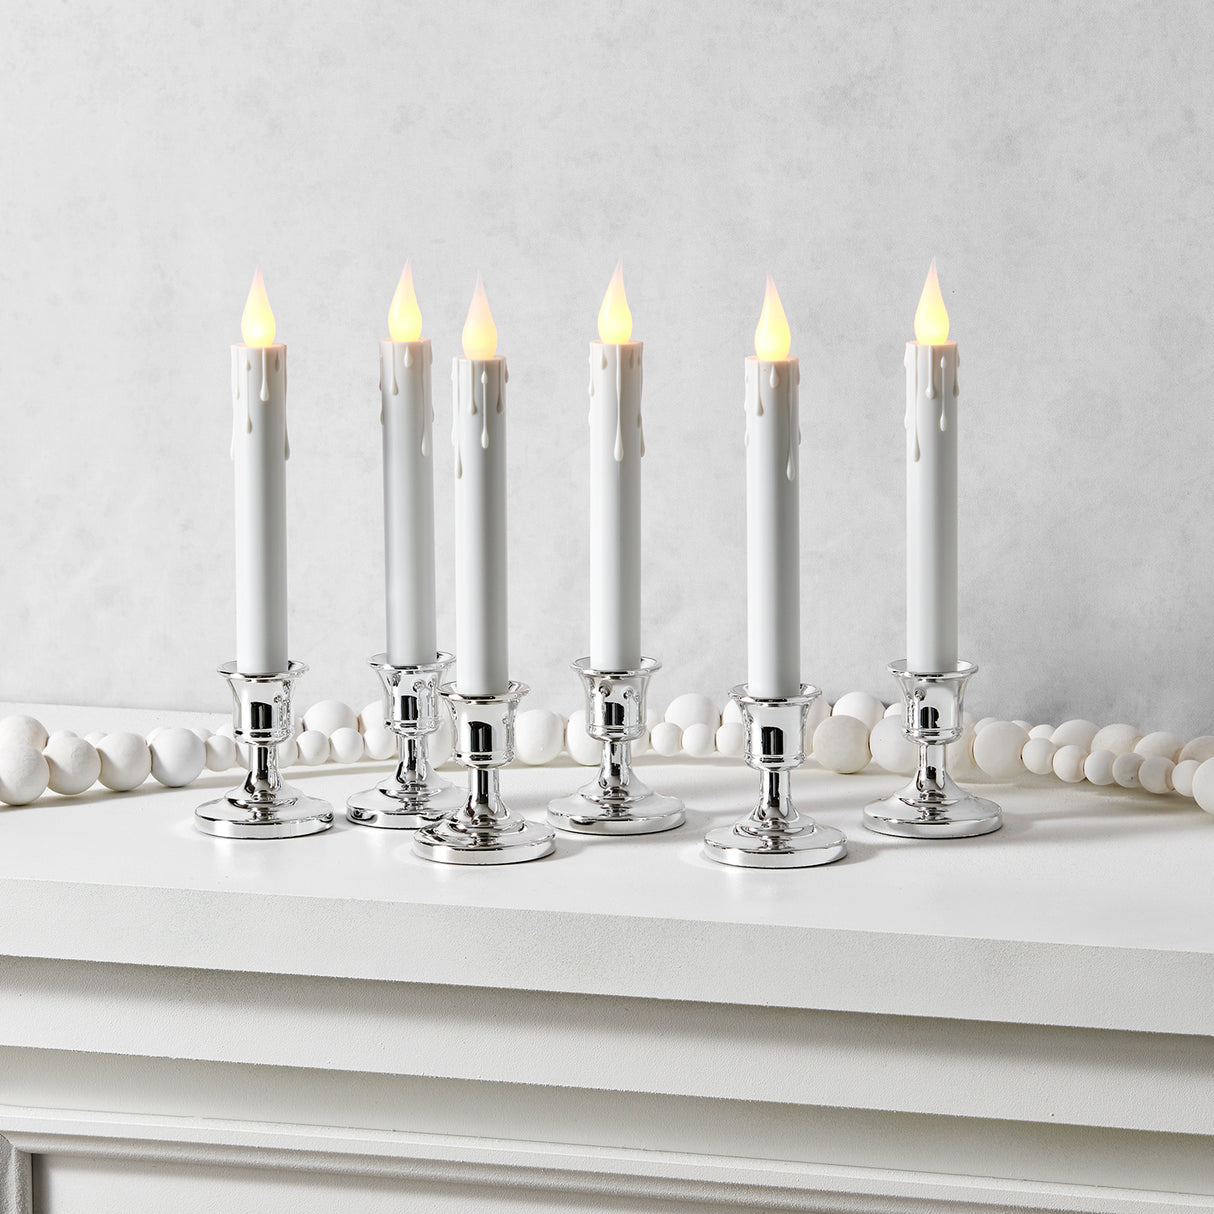 Ivy White Flameless Resin Window Candles with Removable Silver Bases, Set of 6